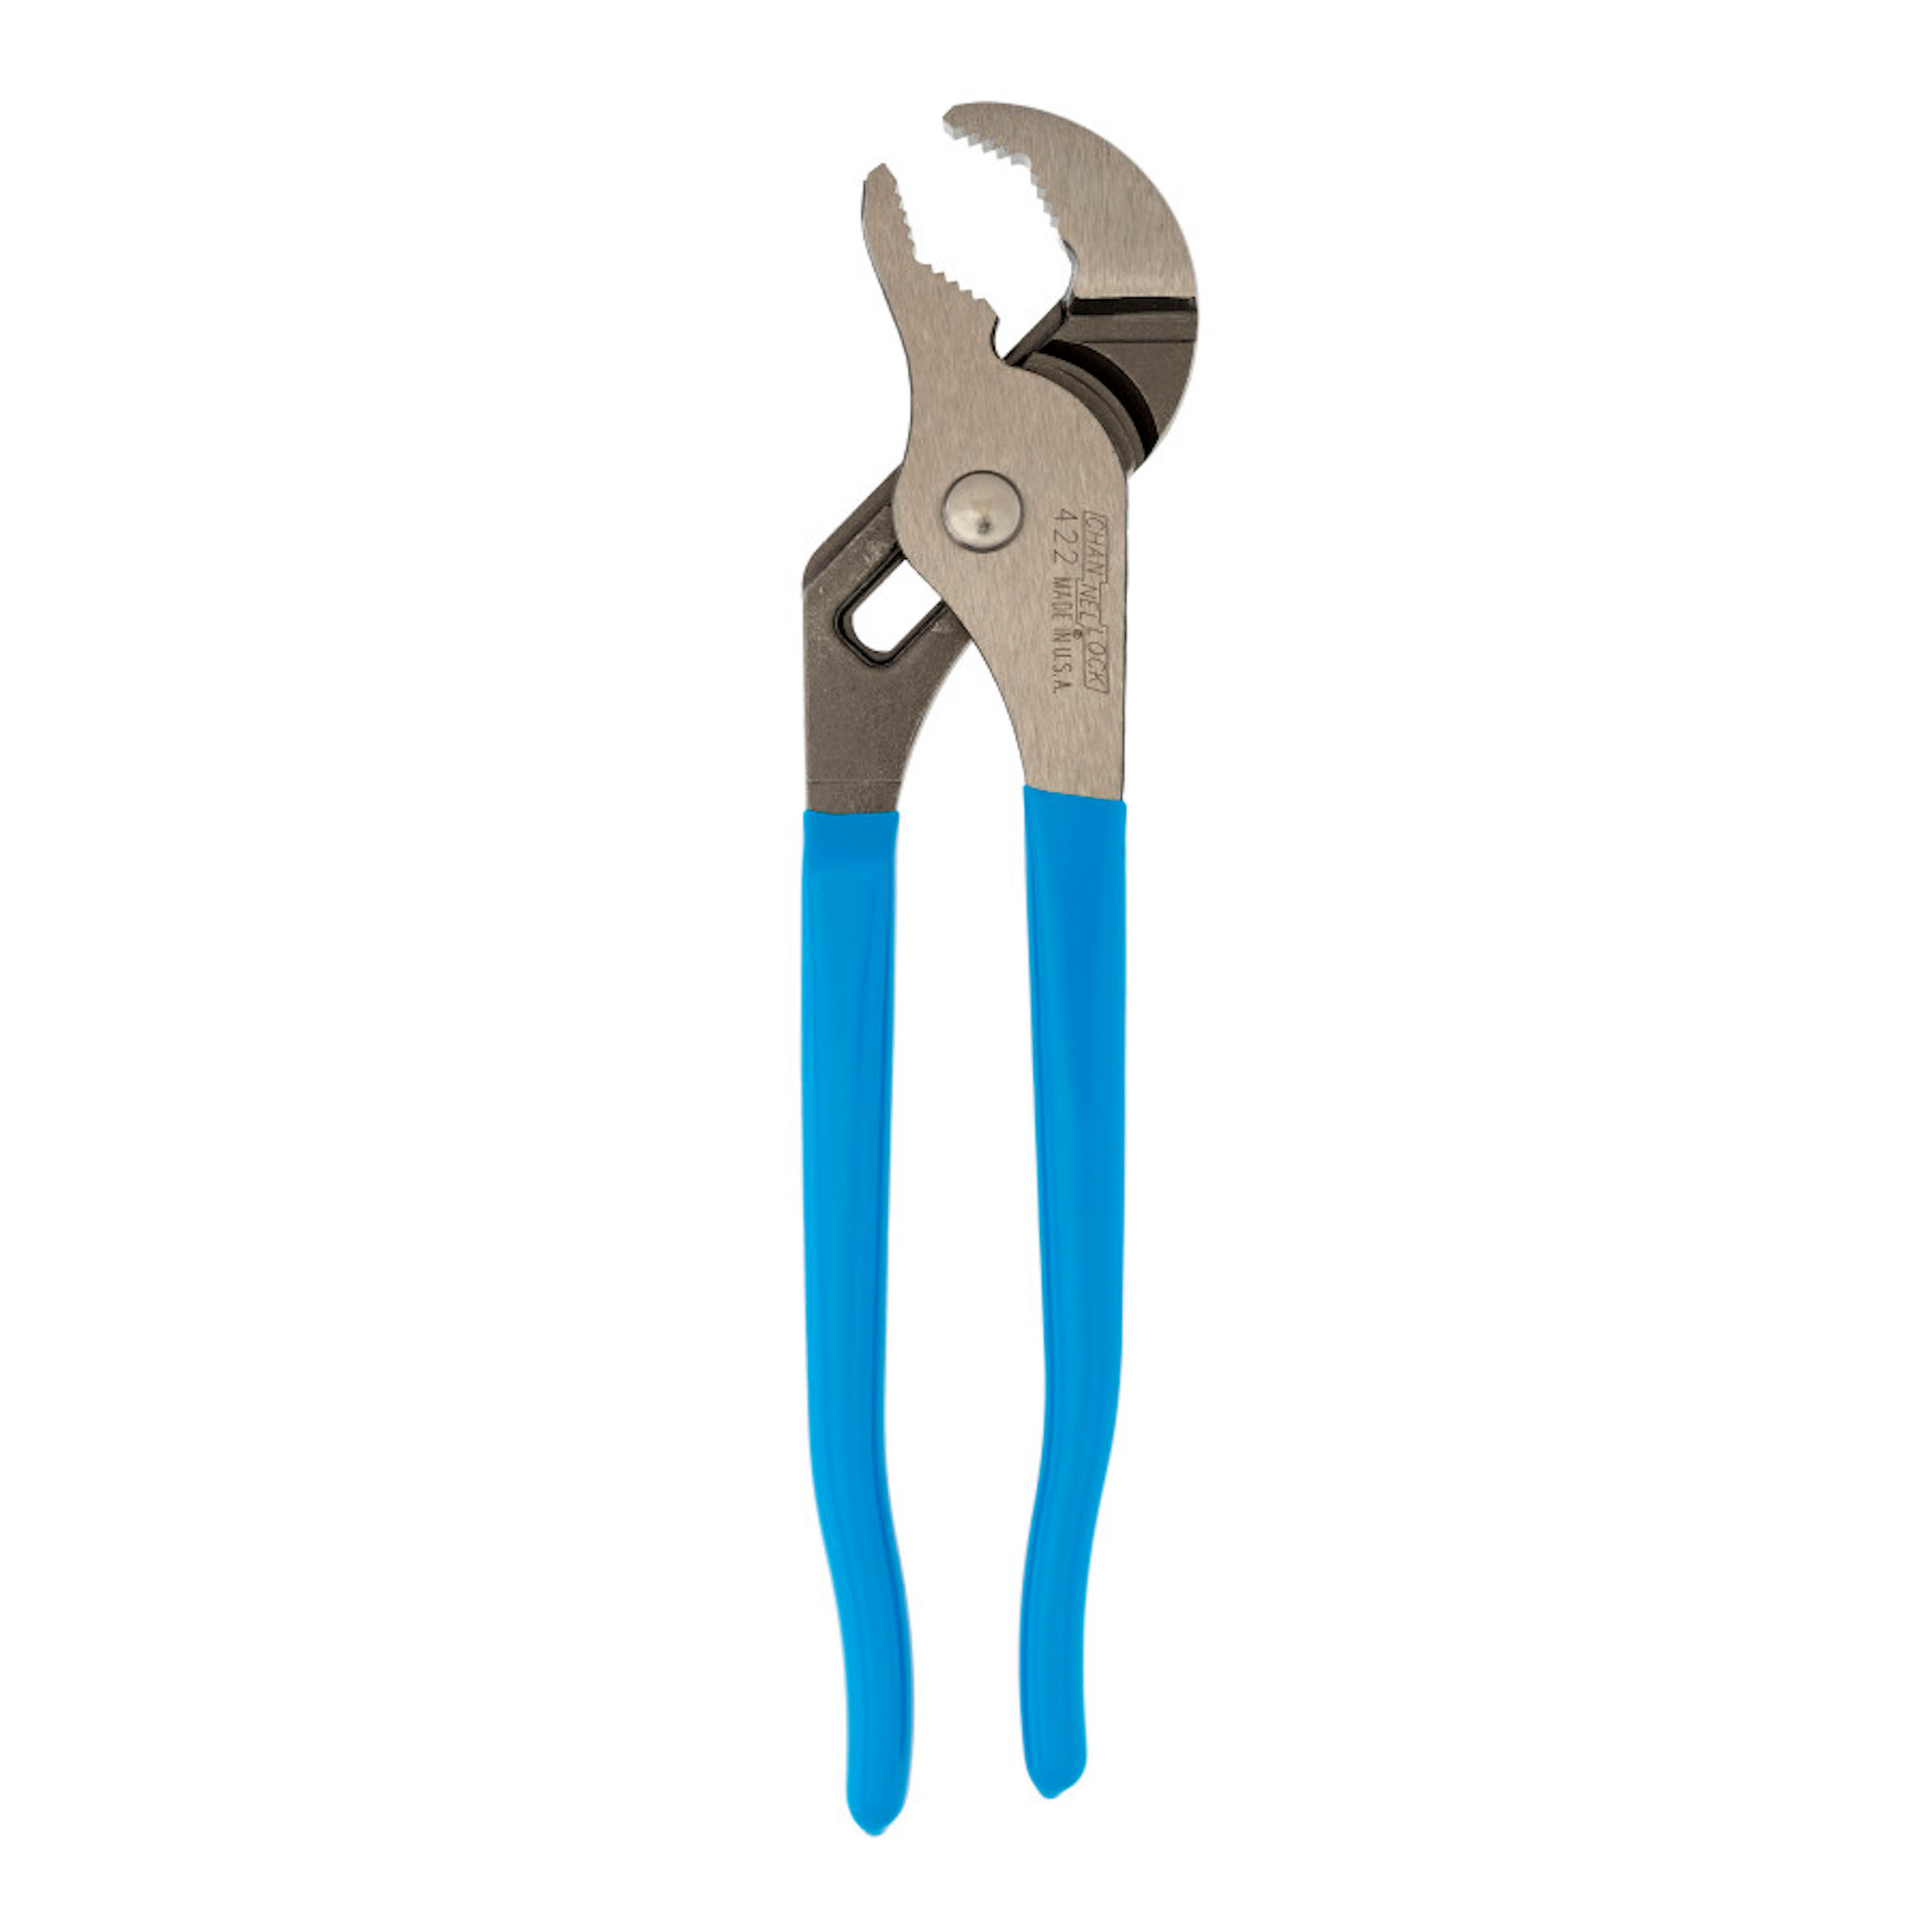 Channellock V-Jaw Tongue and Groove Pliers 240mm